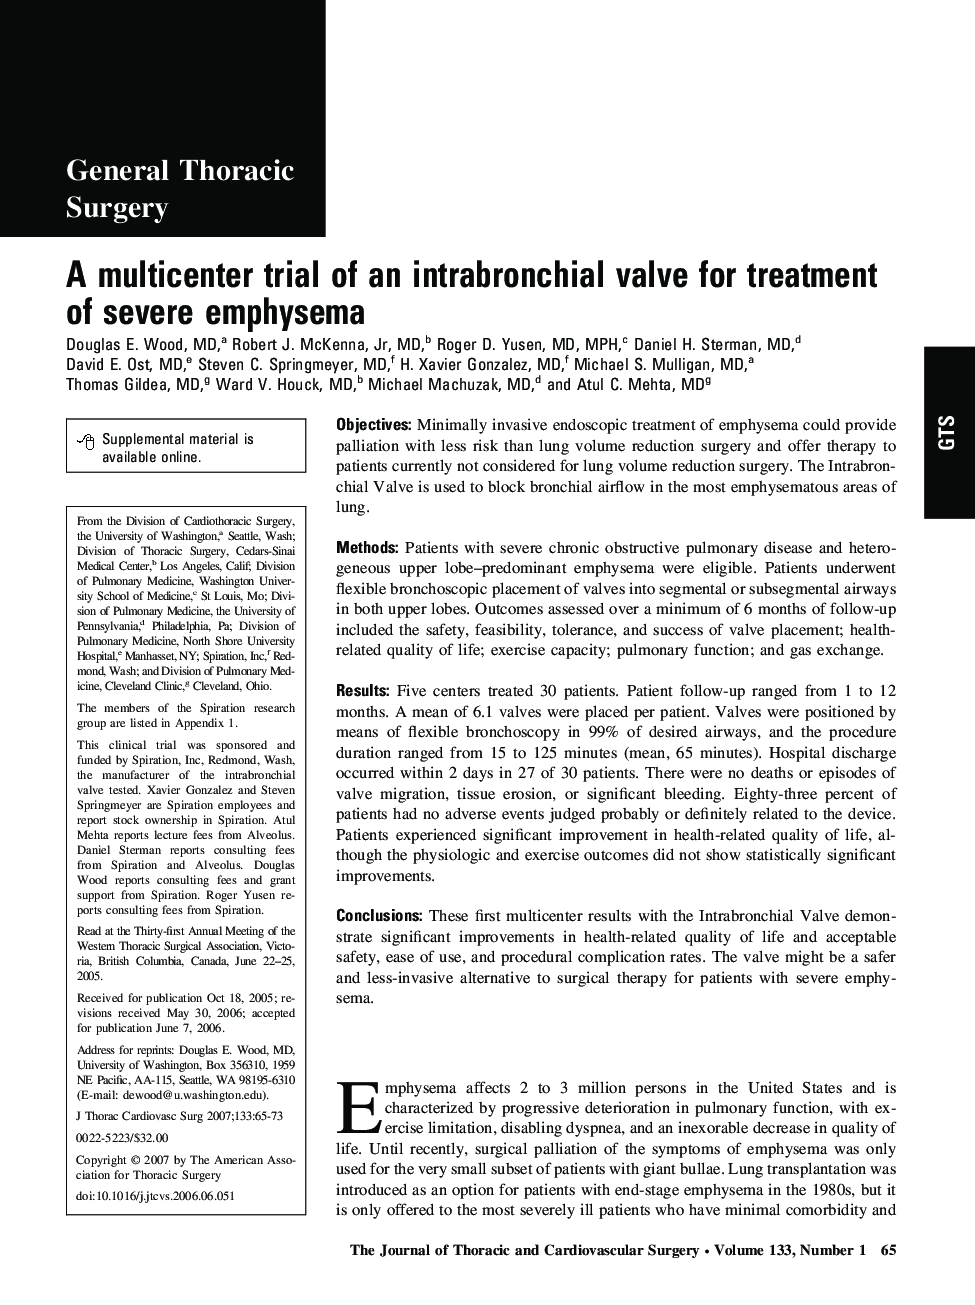 A multicenter trial of an intrabronchial valve for treatment of severe emphysema